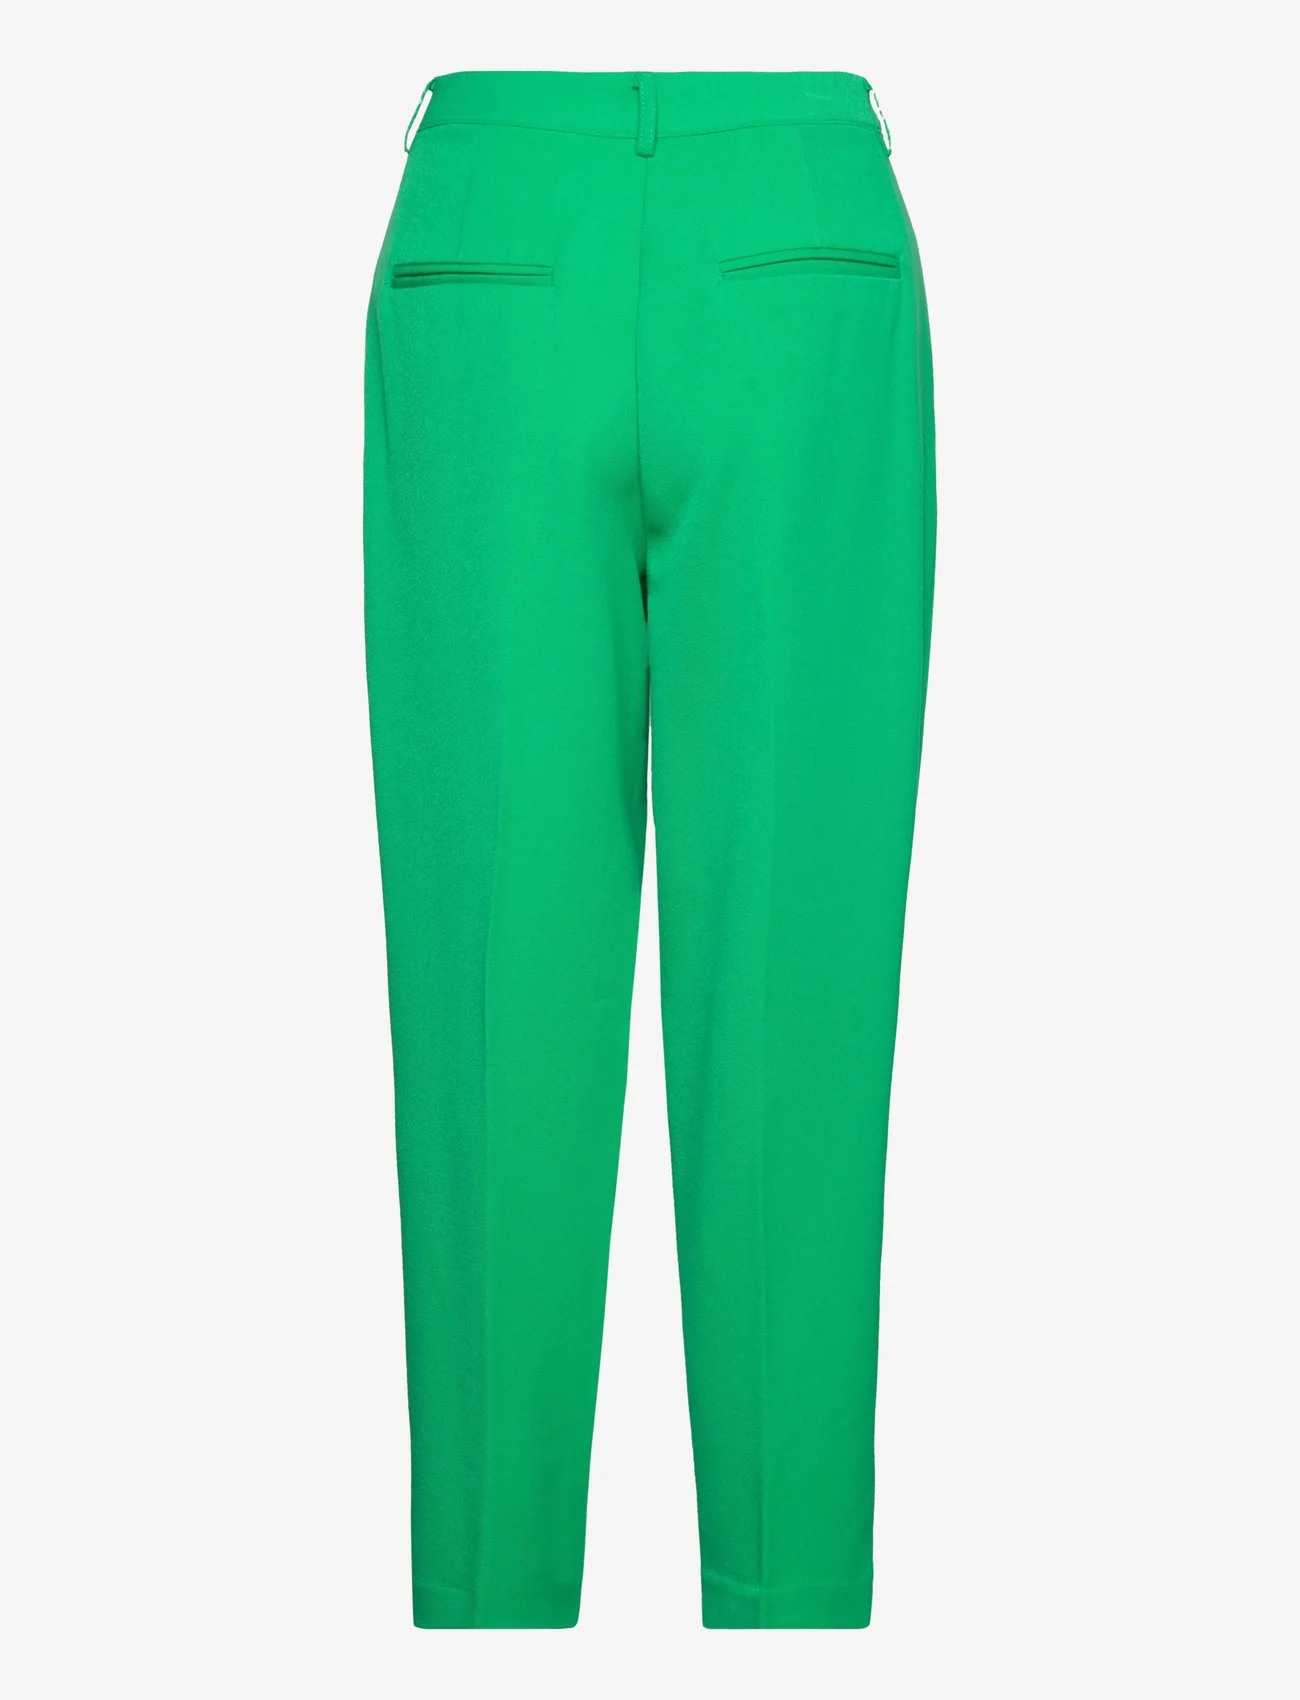 FREE/QUENT - FQKITTY-PANT - rette bukser - bright green - 1